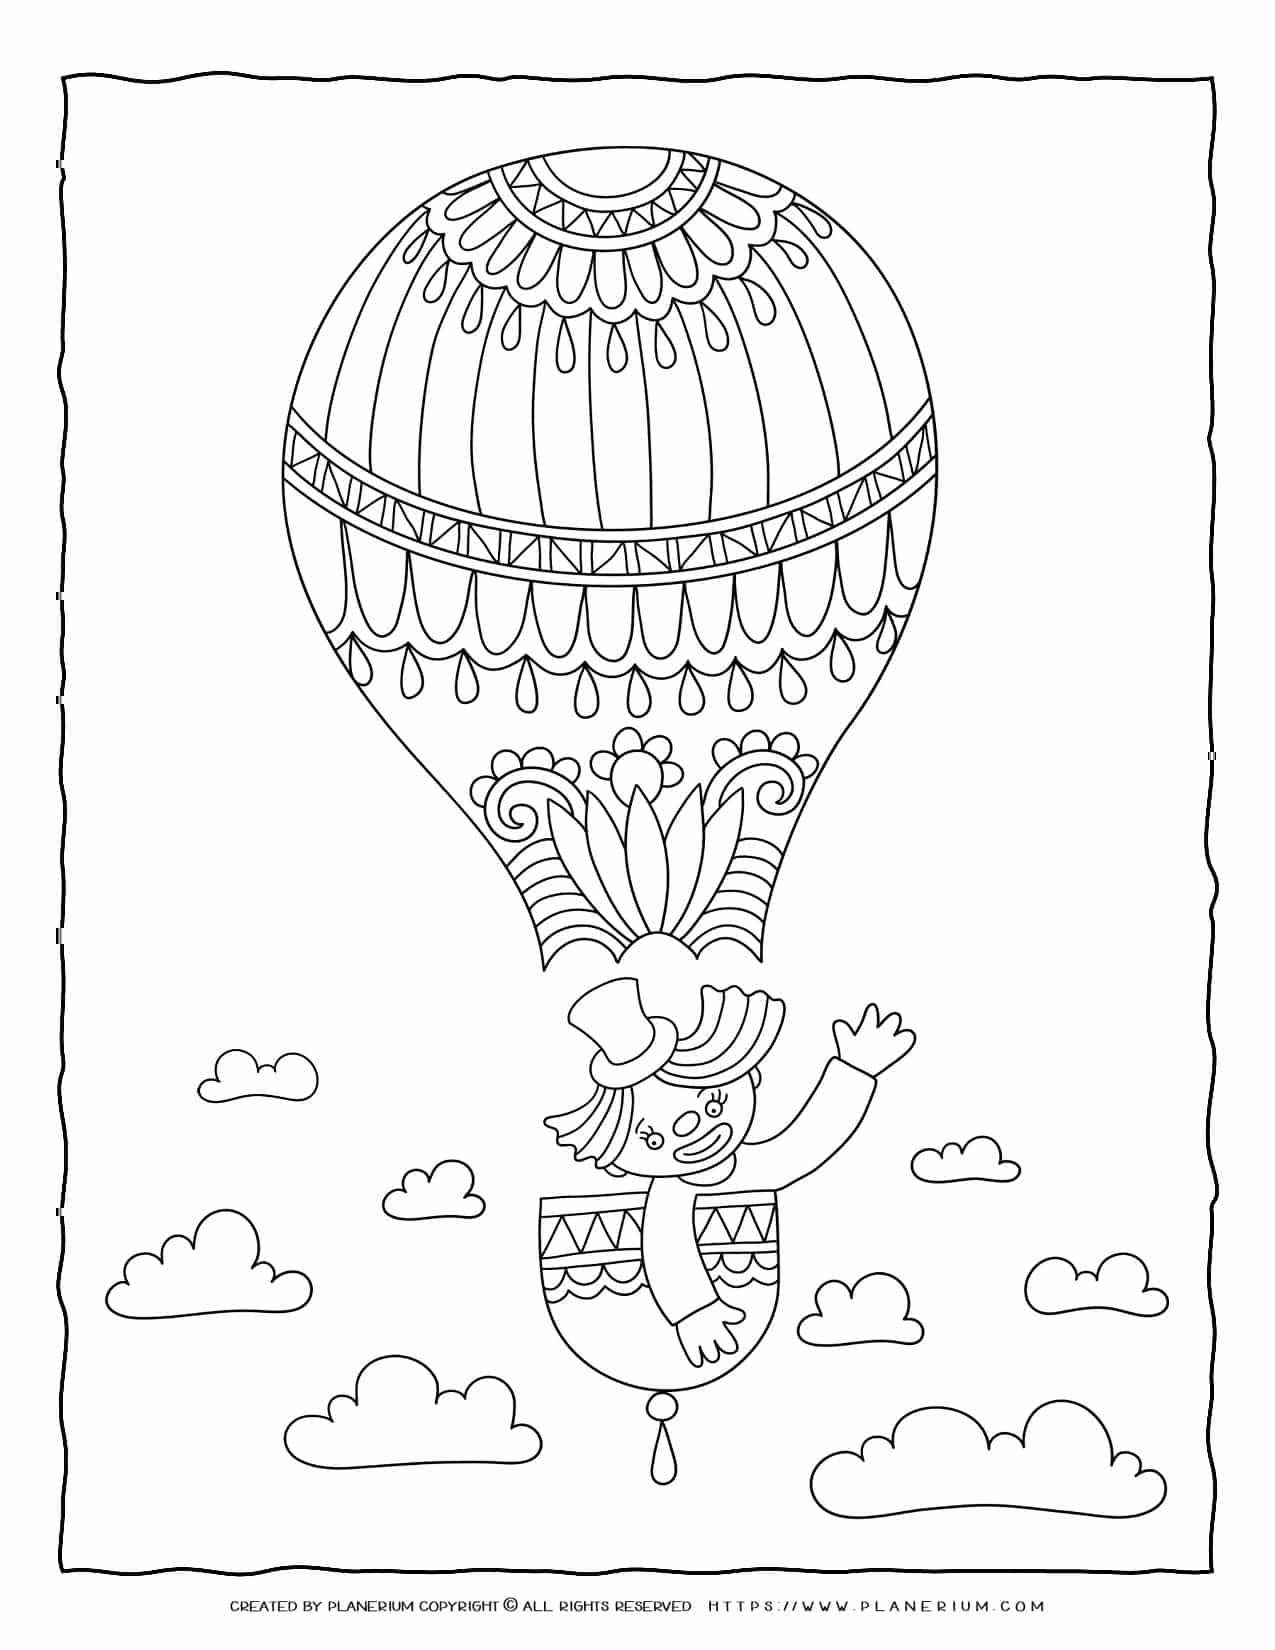 Circus Coloring Page - Clown on Airballoon | Planerium